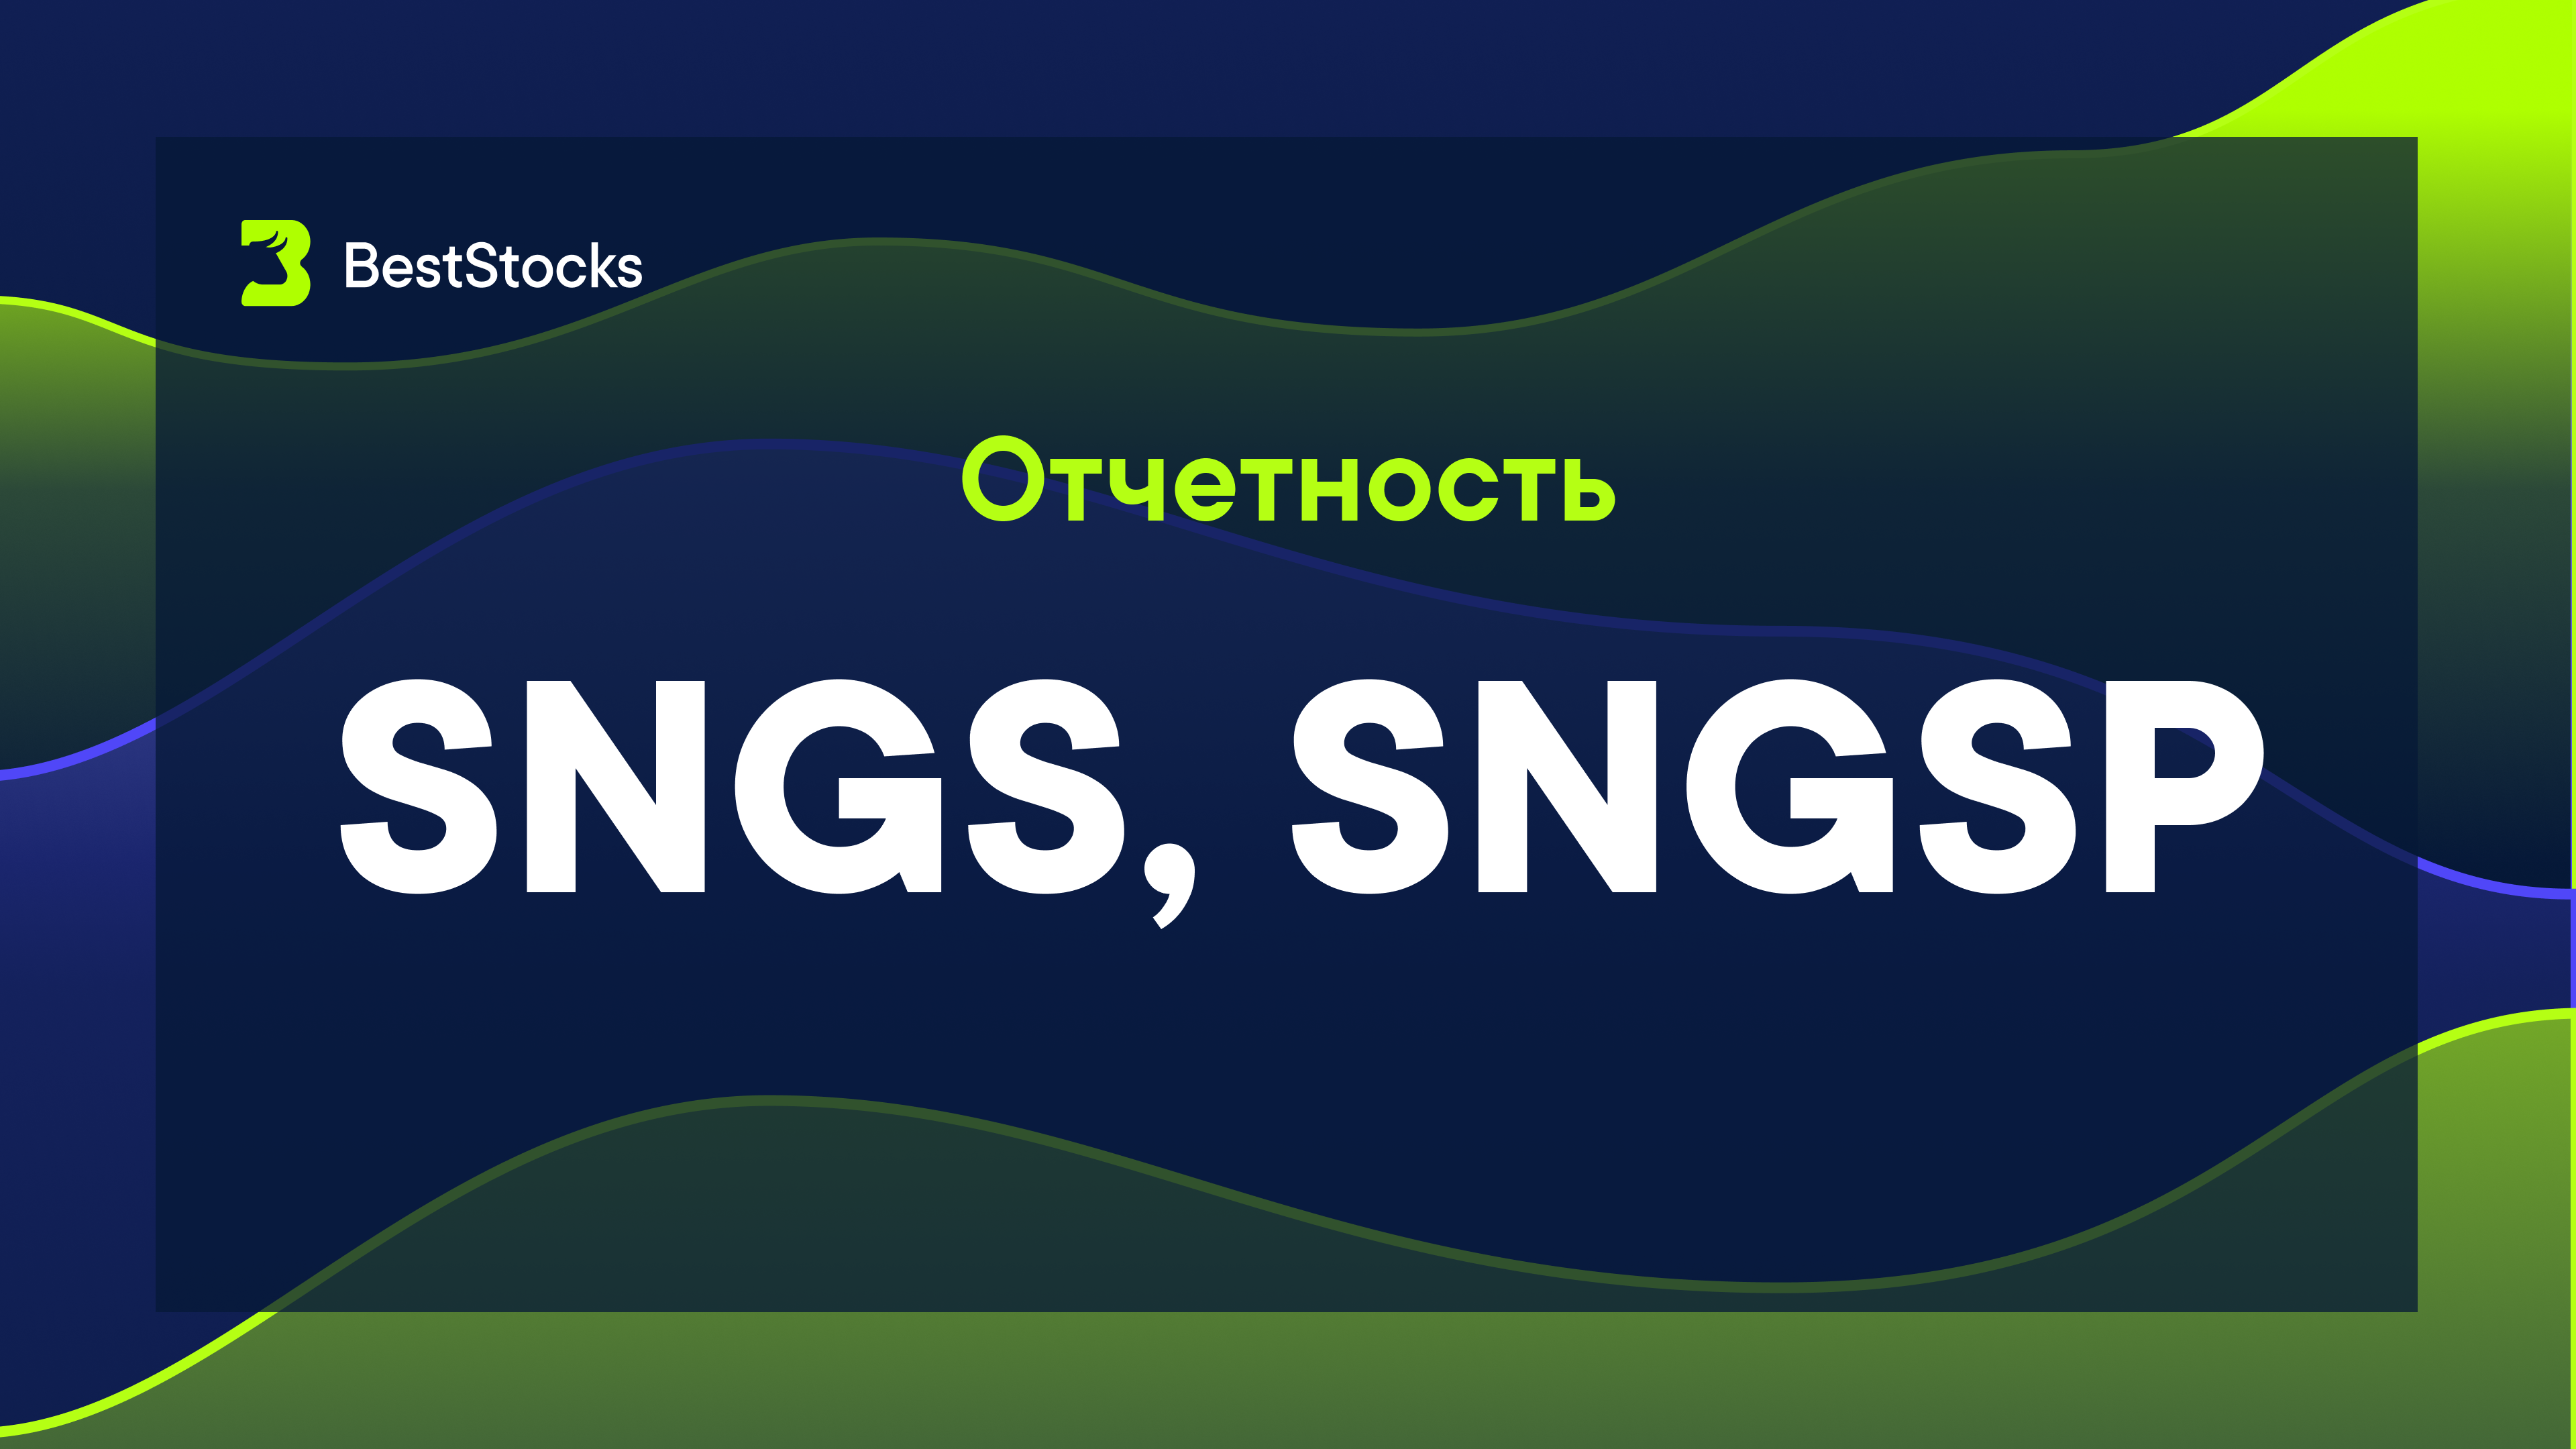 Sngs